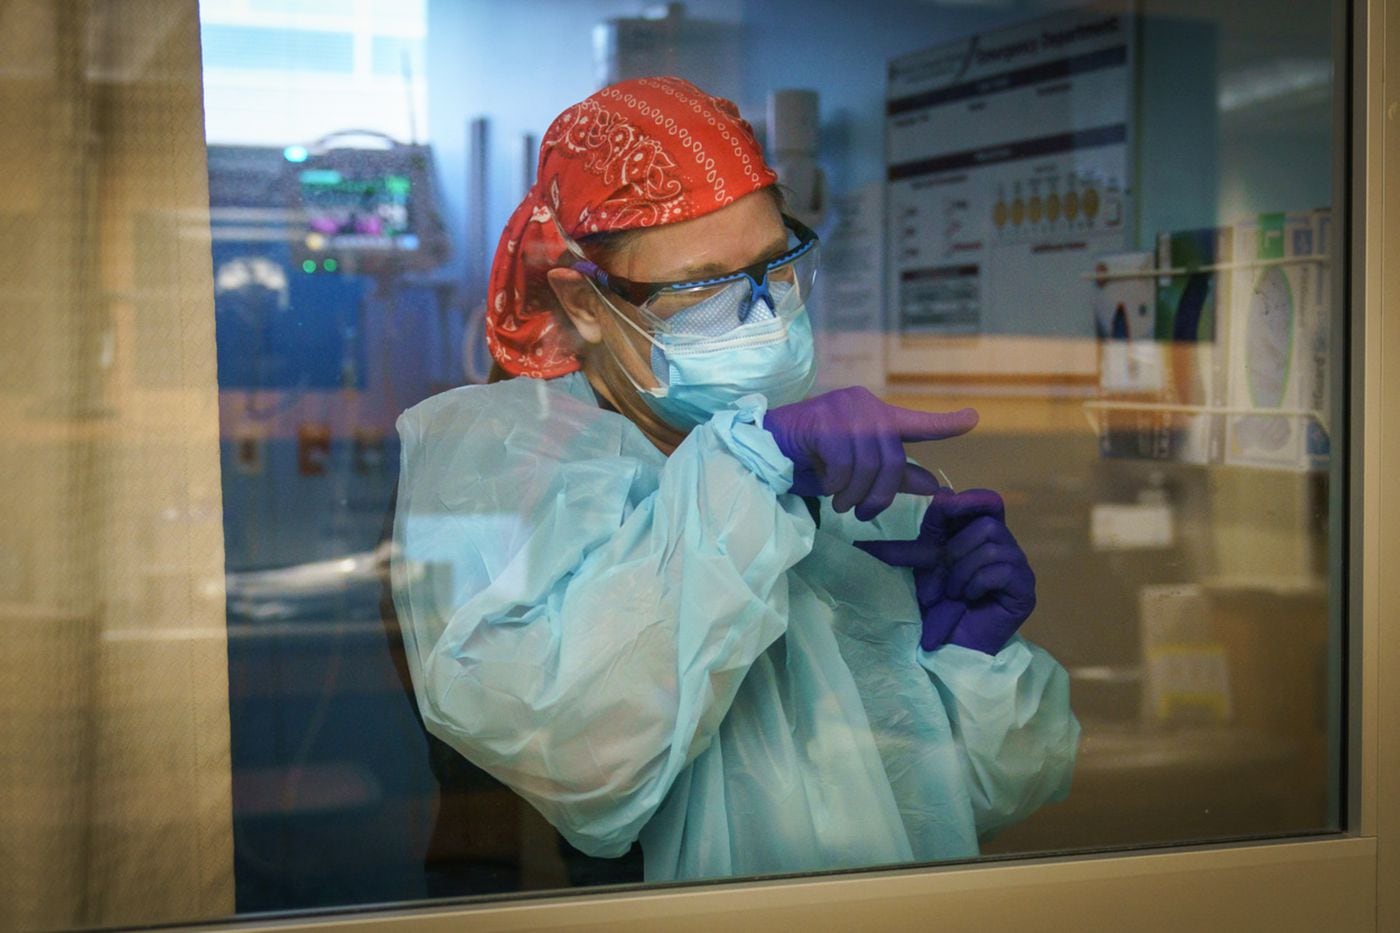 Nurse Sherry Seymour gestures to a colleague to request supplies while treating a COVID-19 patient inside a glass-enclosed ER bay at Suburban Community Hospital. 